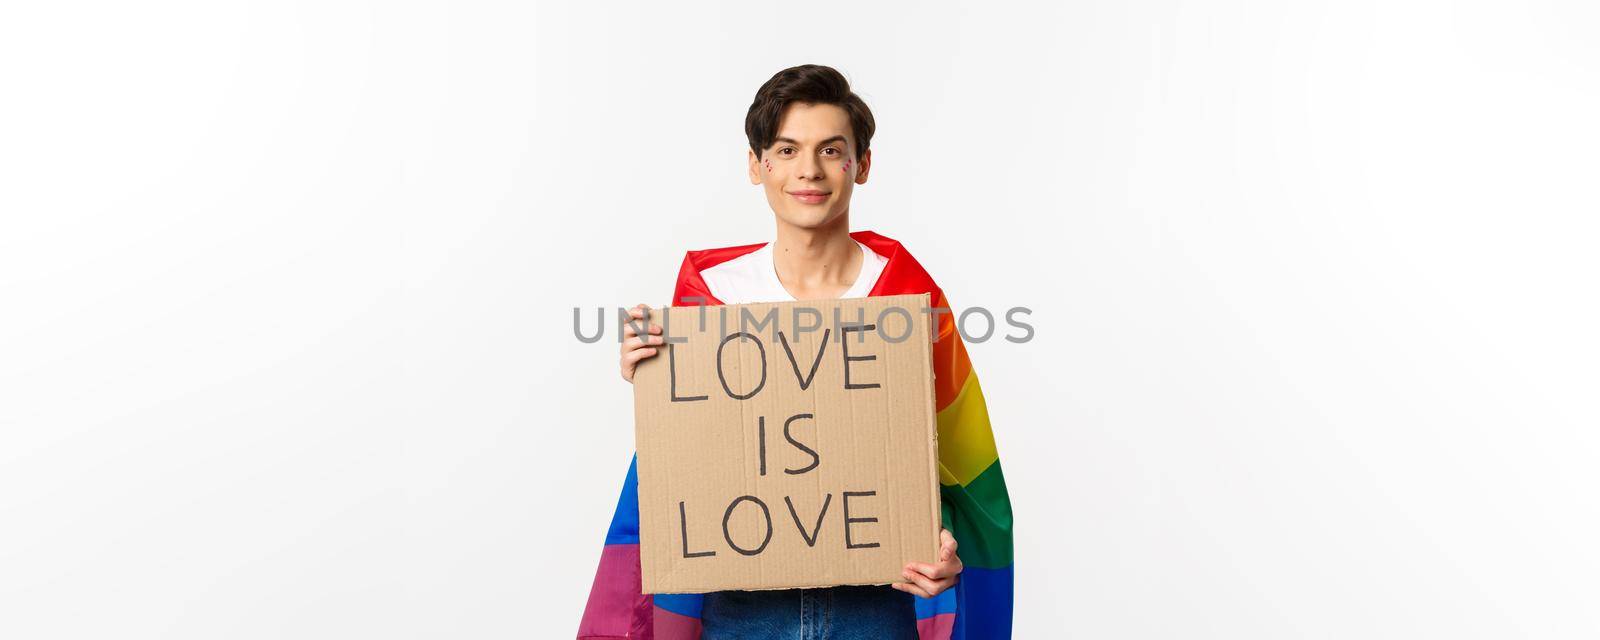 Smiling gay man activist holding sign love is love for lgbt pride parade, wearing Rainbow flag, standing over white background by Benzoix